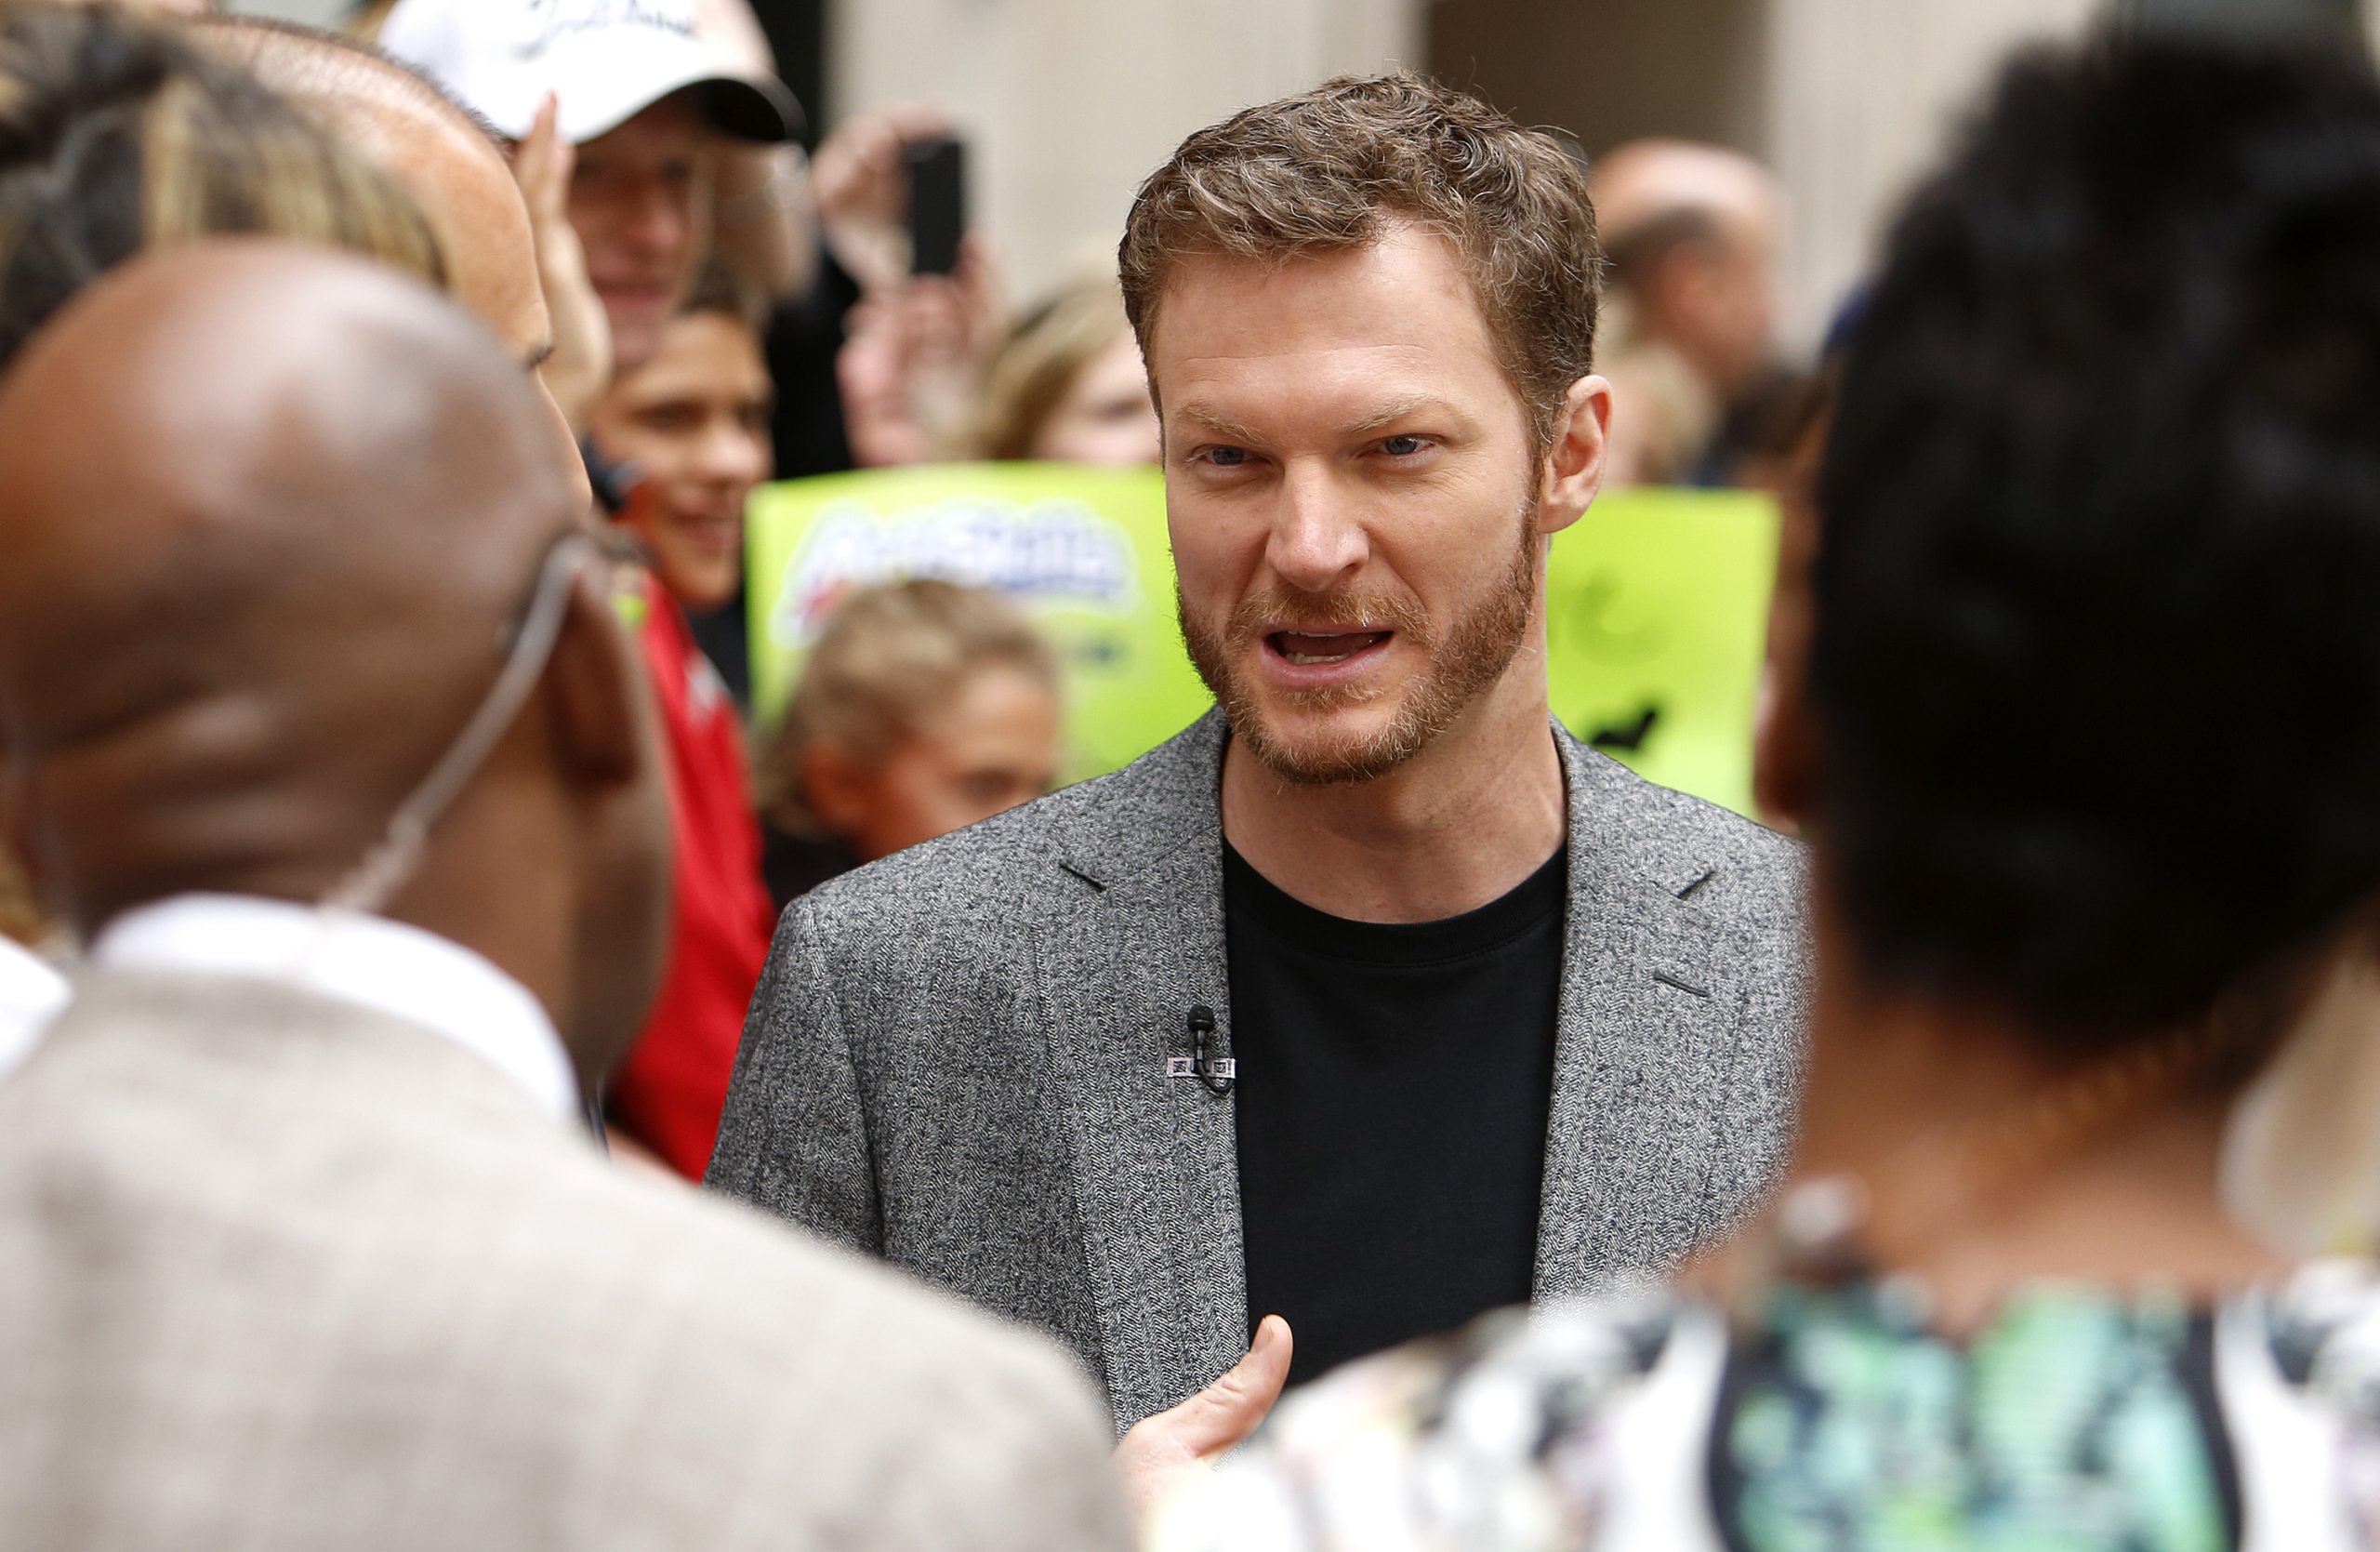 Dale Earnhardt Jr. admitted he's "terrified" about an upcoming NASCAr commitment.